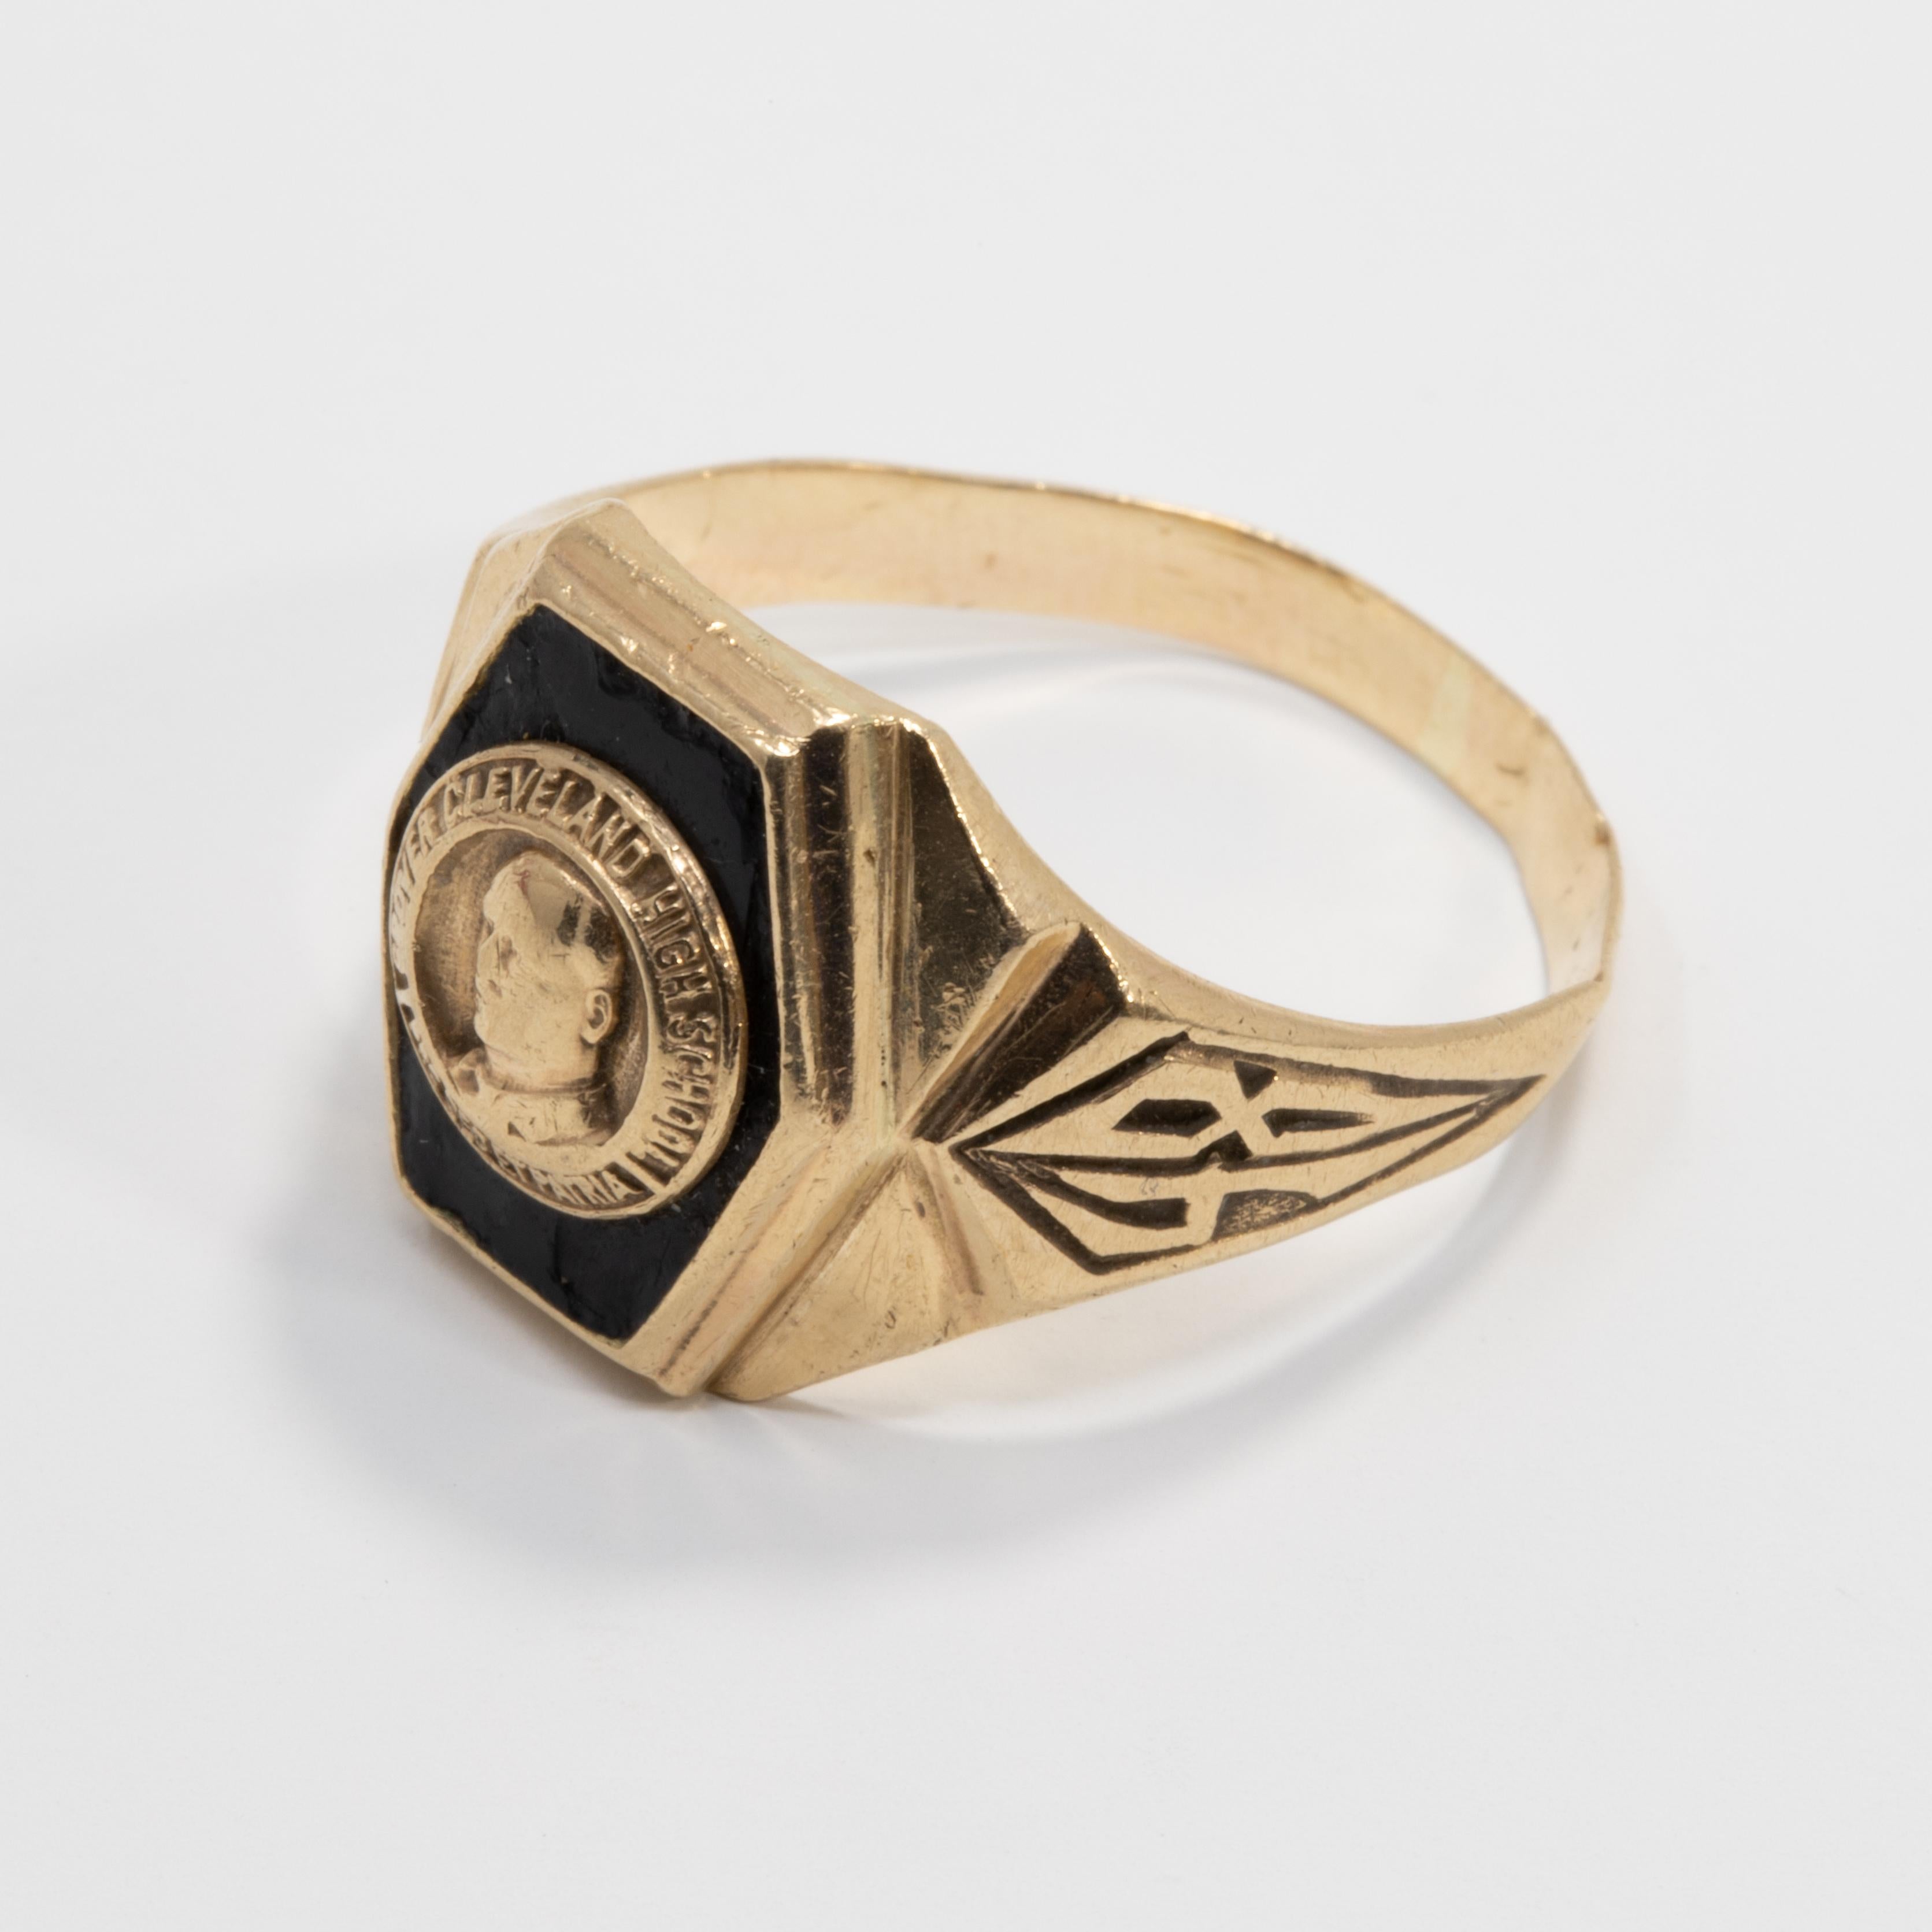 A classy 10K gold 1948 class ring with onyx inlay. The face features a motif of a man and inscribed 